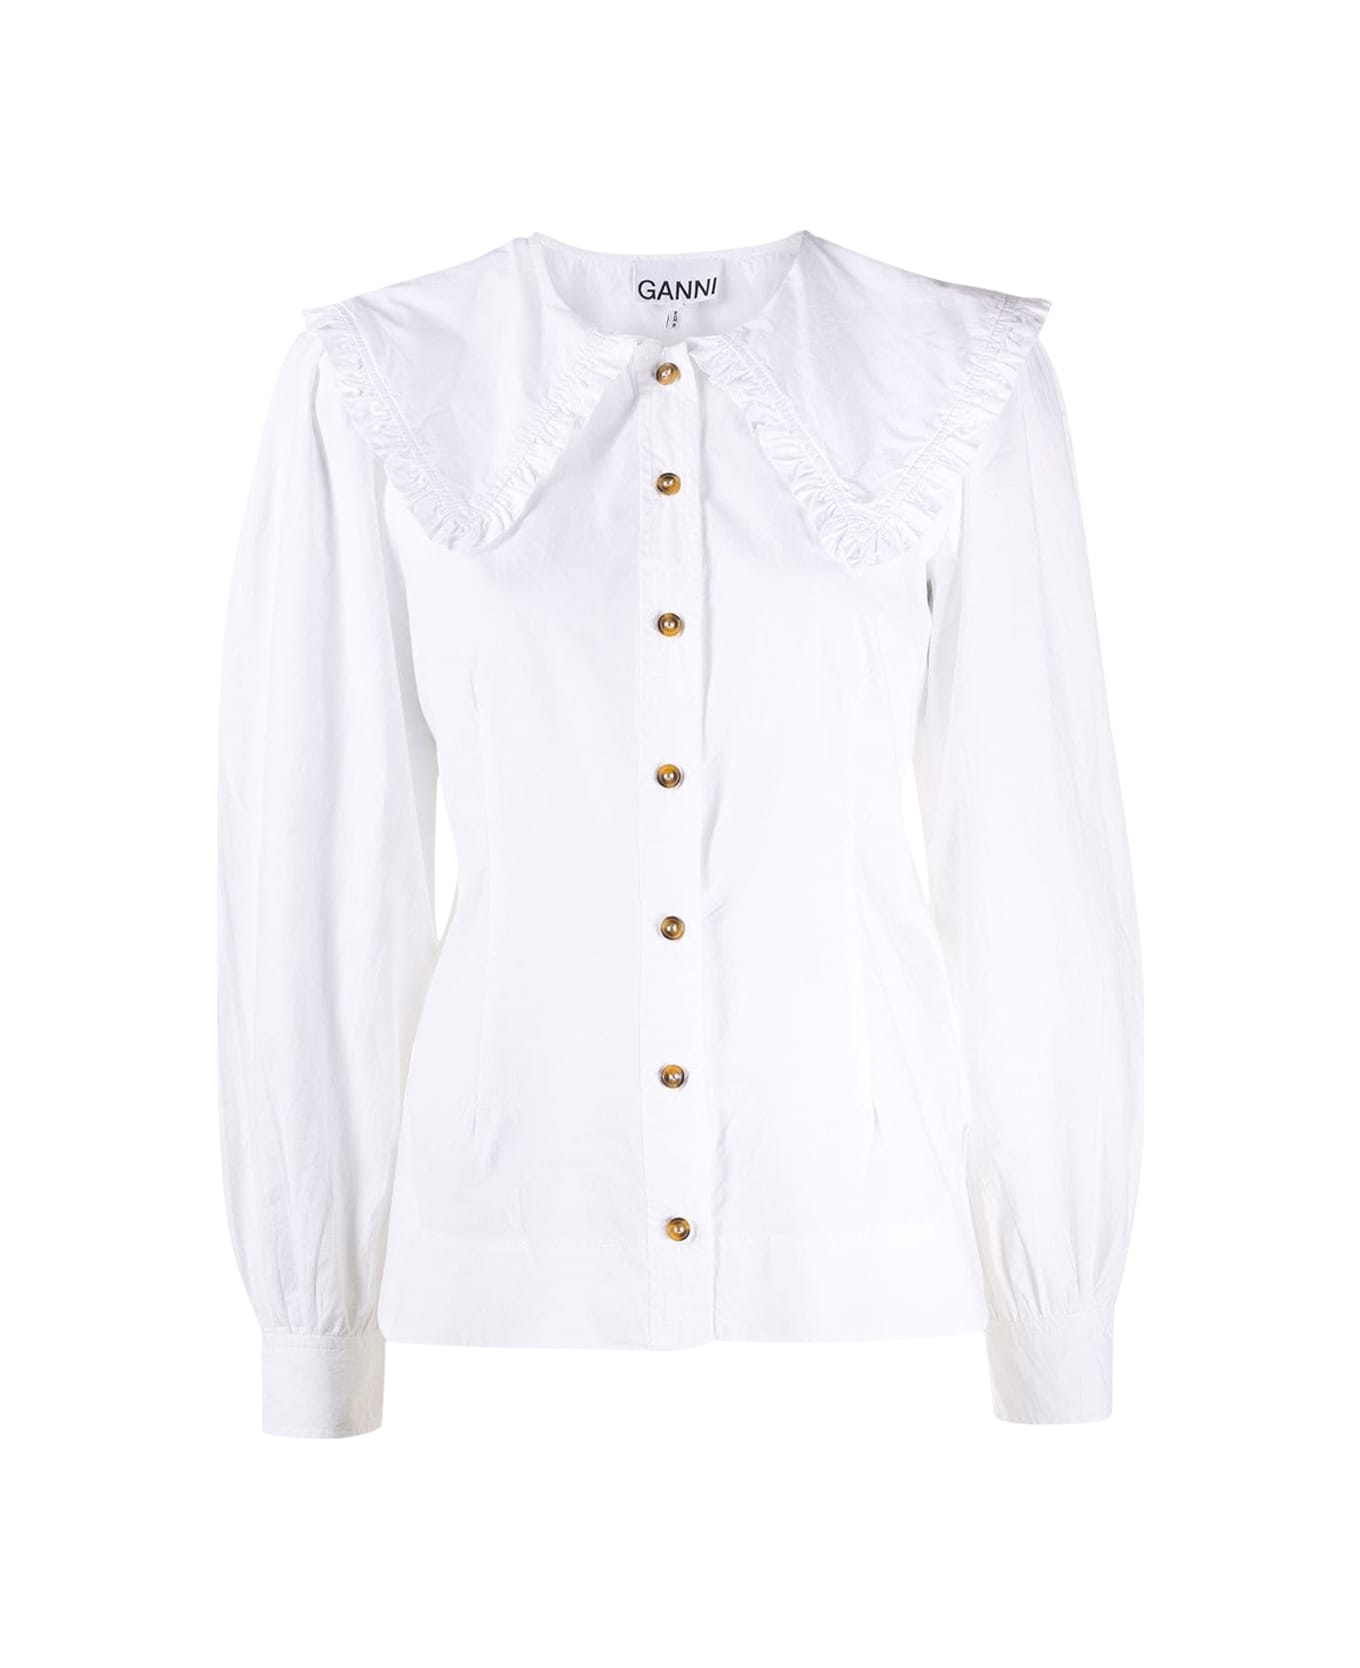 Ganni Fitted Shirt - Bright White